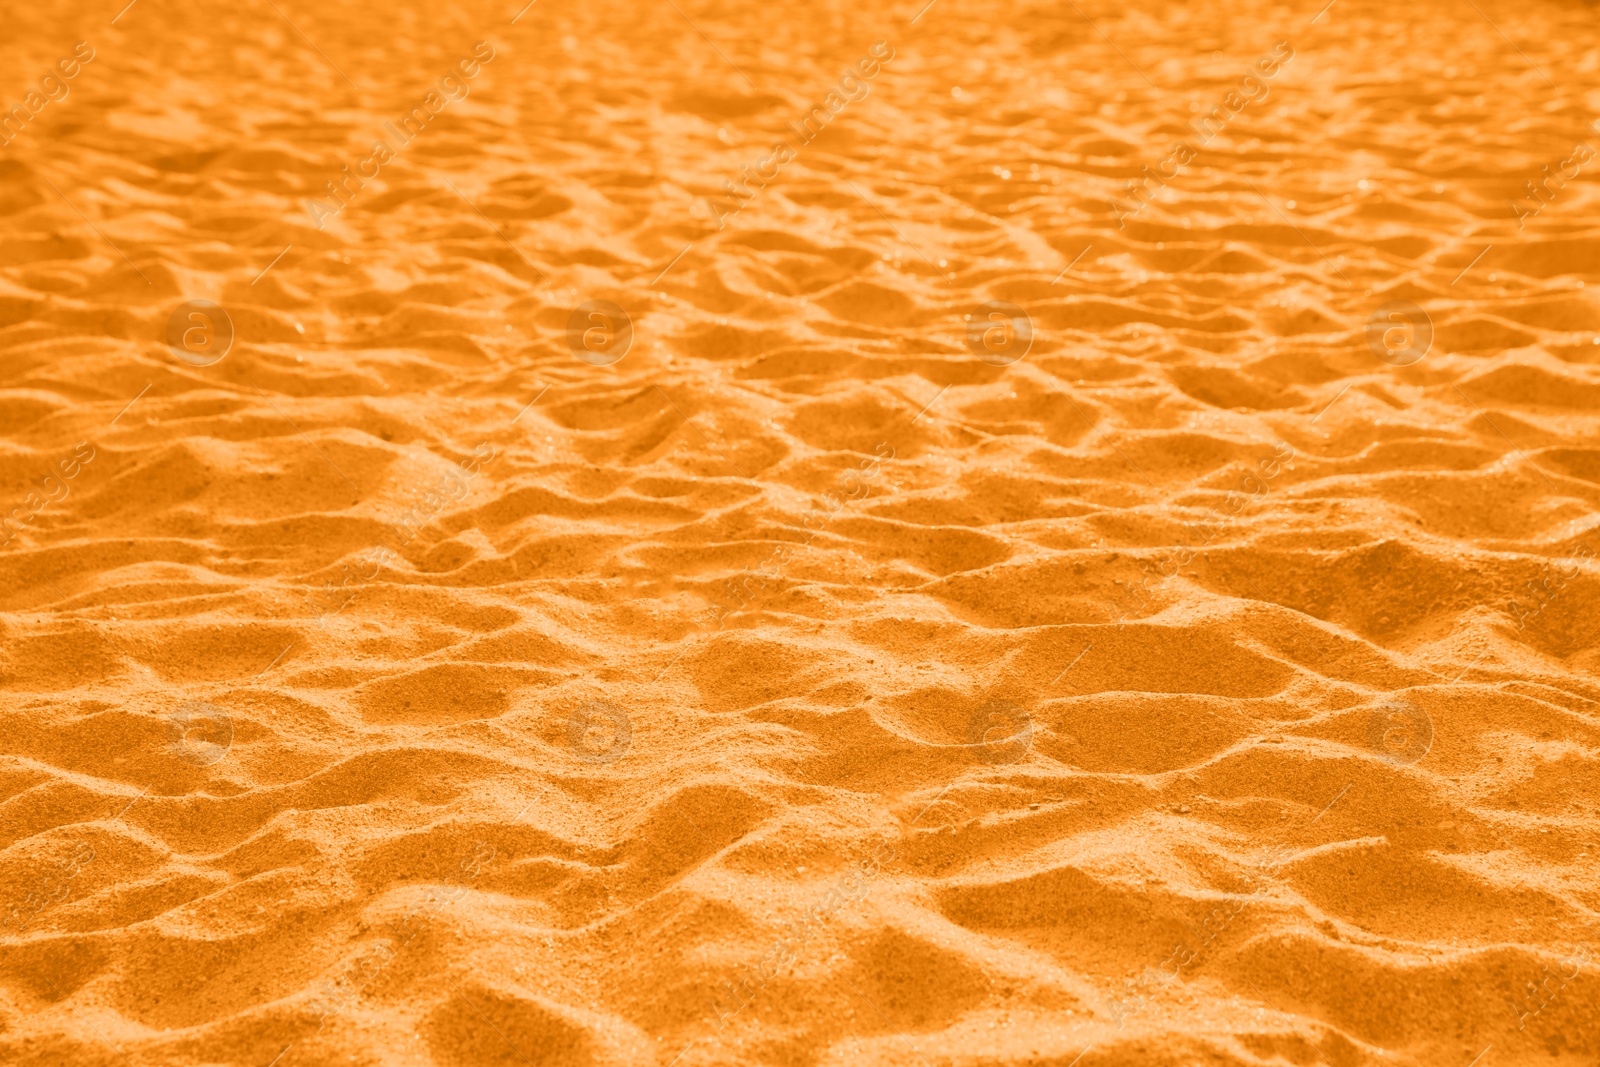 Image of Sandy surface on sunny day as background